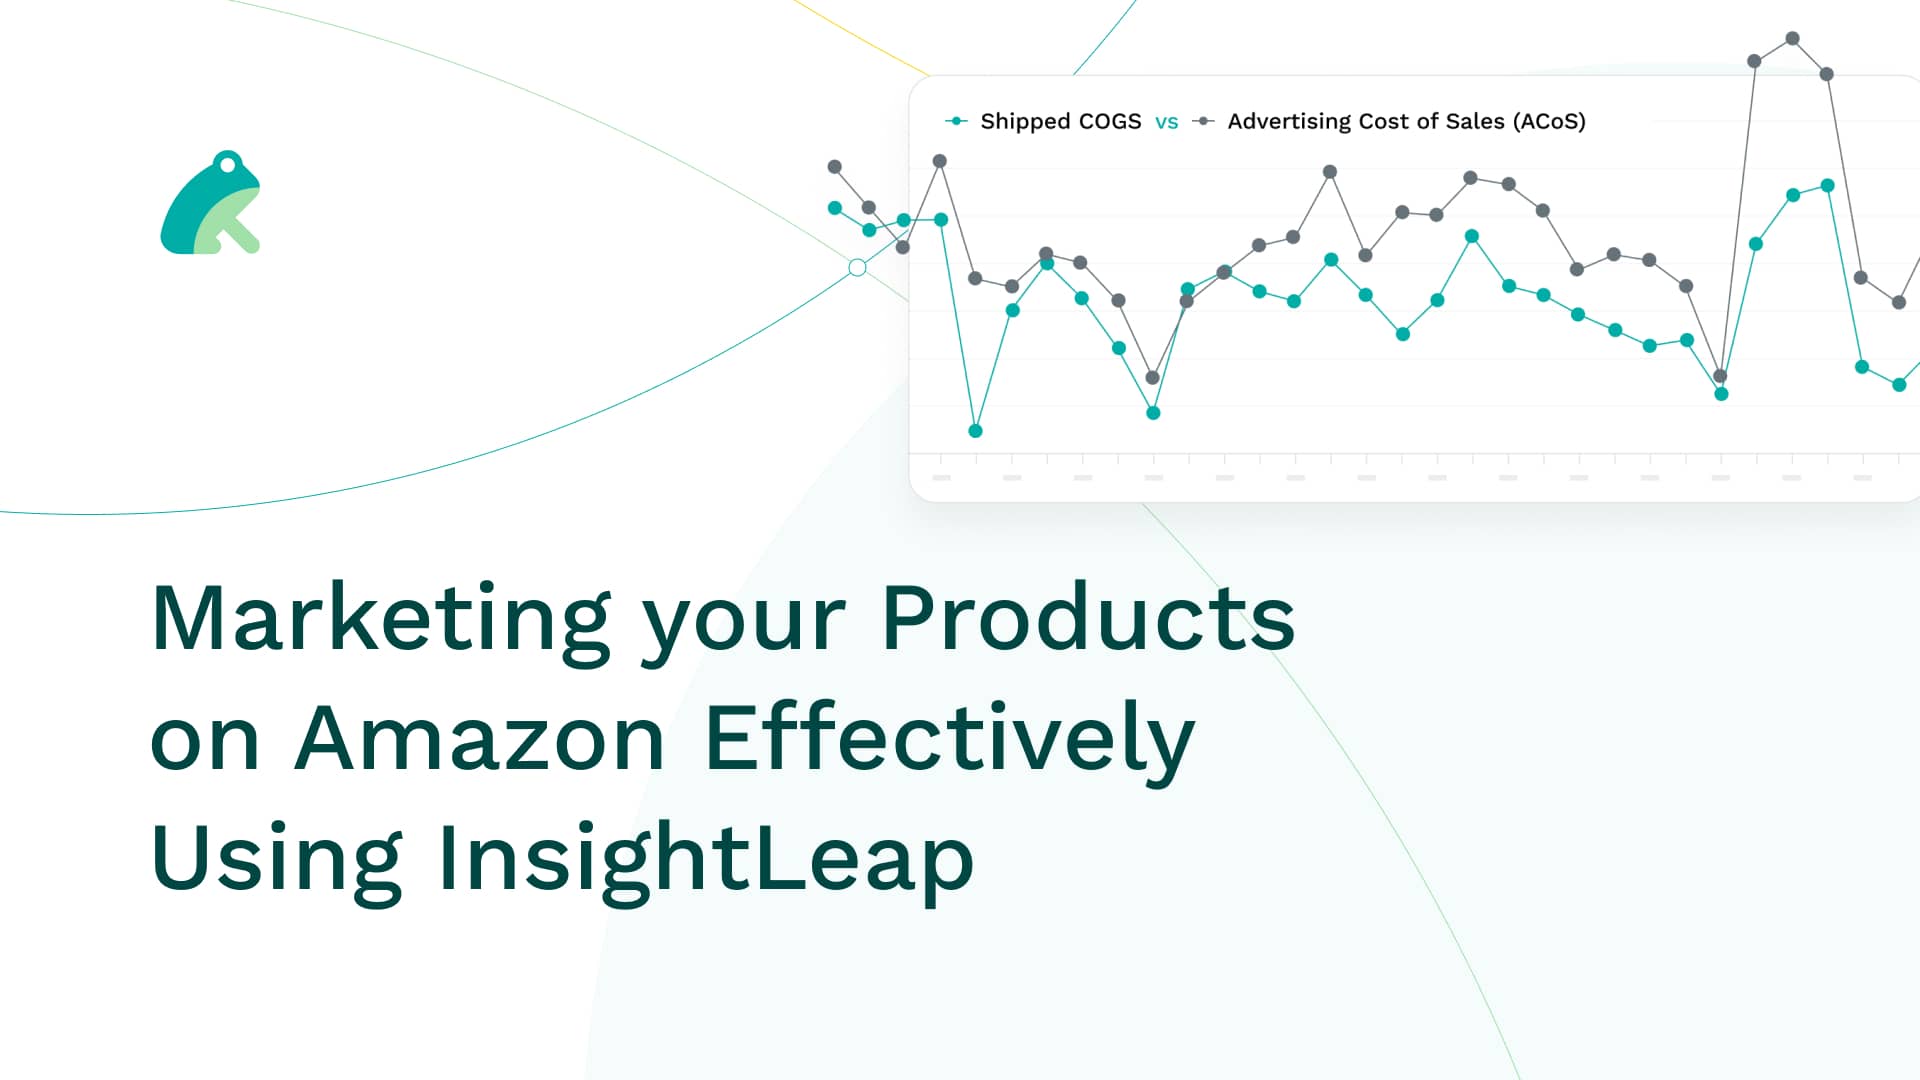 Marketing your Products on Amazon Effectively Using InsightLeap